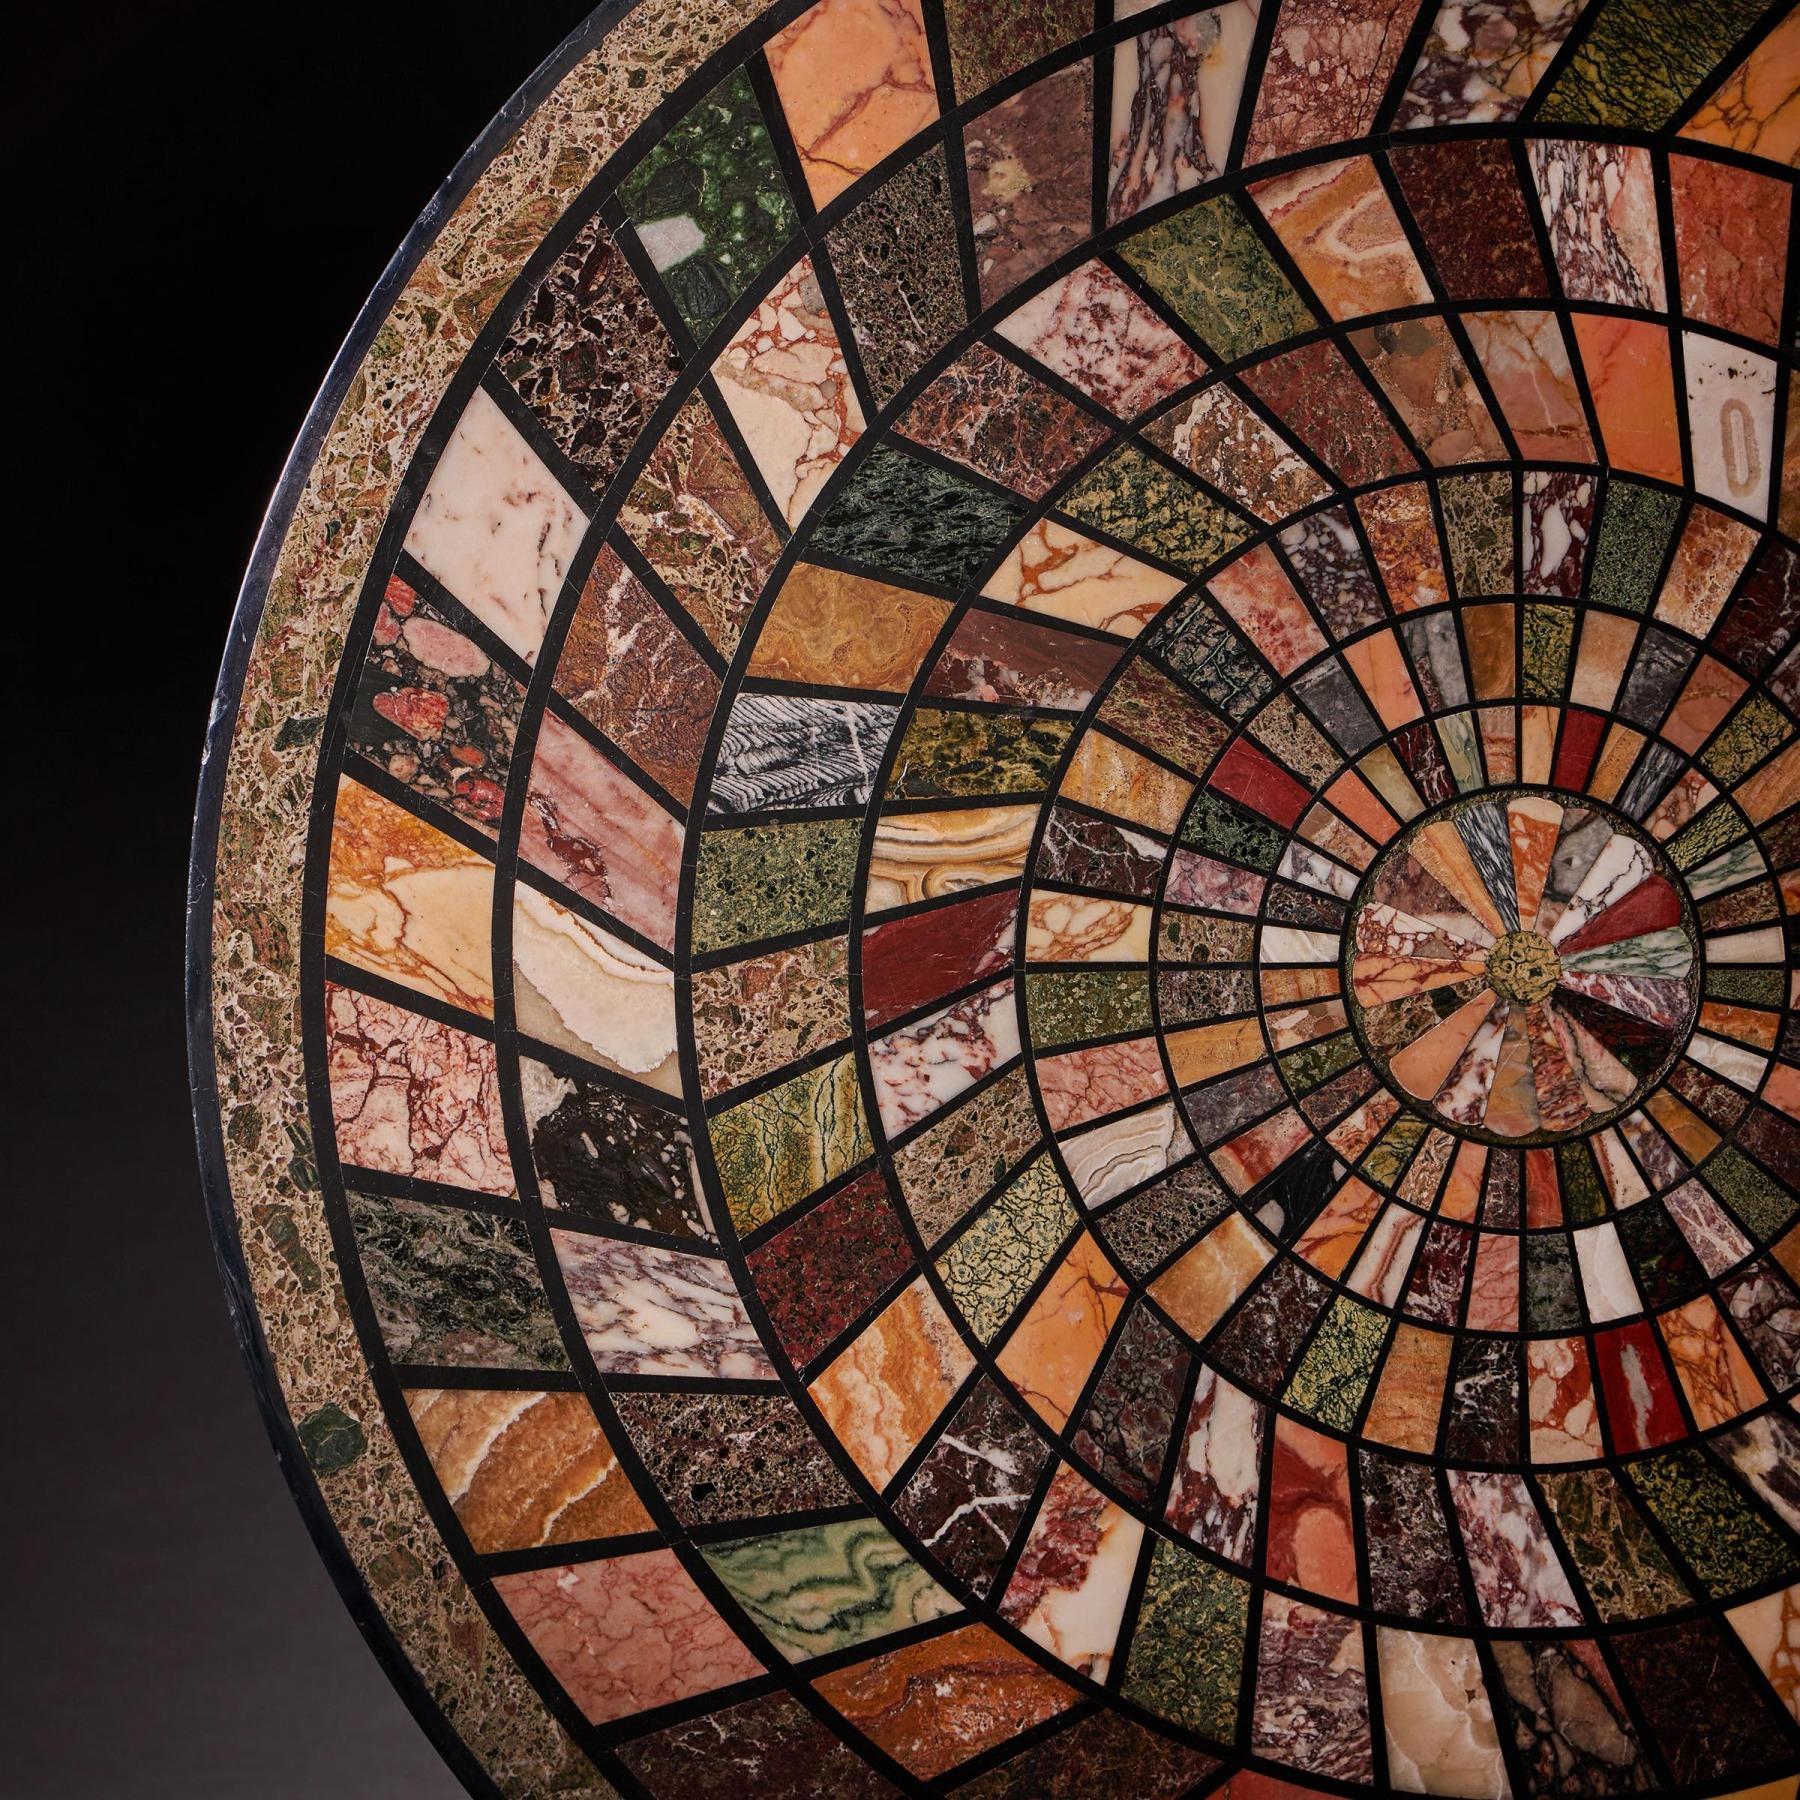 An extremely large mid 19th Century grand tour specimen marble top with rare and fine marble and hardstone examples. 



Italy Rome Circa 1840- 1860



Inlaid with concentric rings of chevron-shaped marbles including: brocatelle, verde antico,